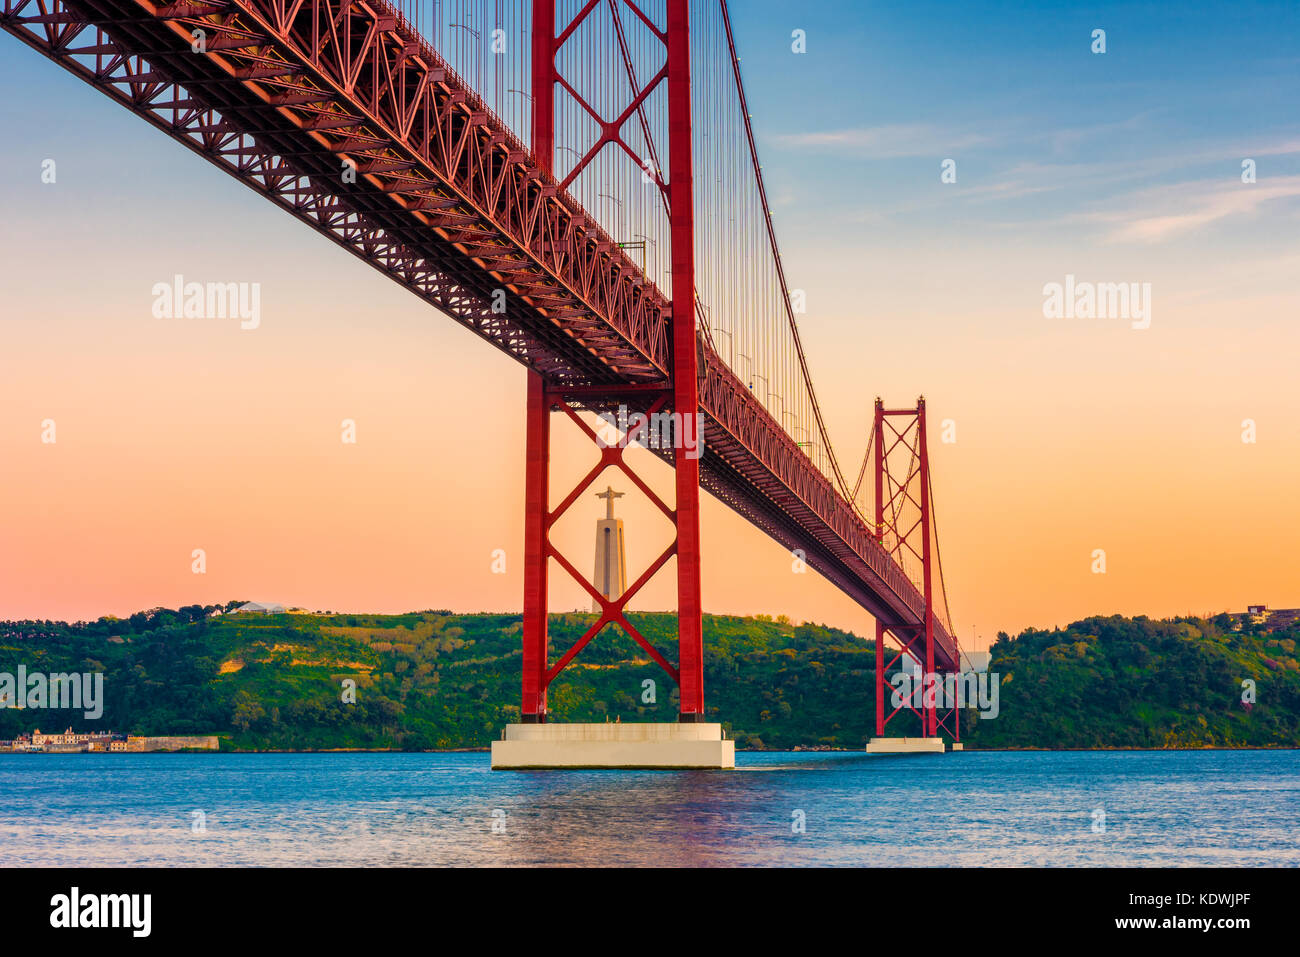 25th of April Bridge, Tagus River and Christ the King statue in Lisbon Portugal around sunset Stock Photo